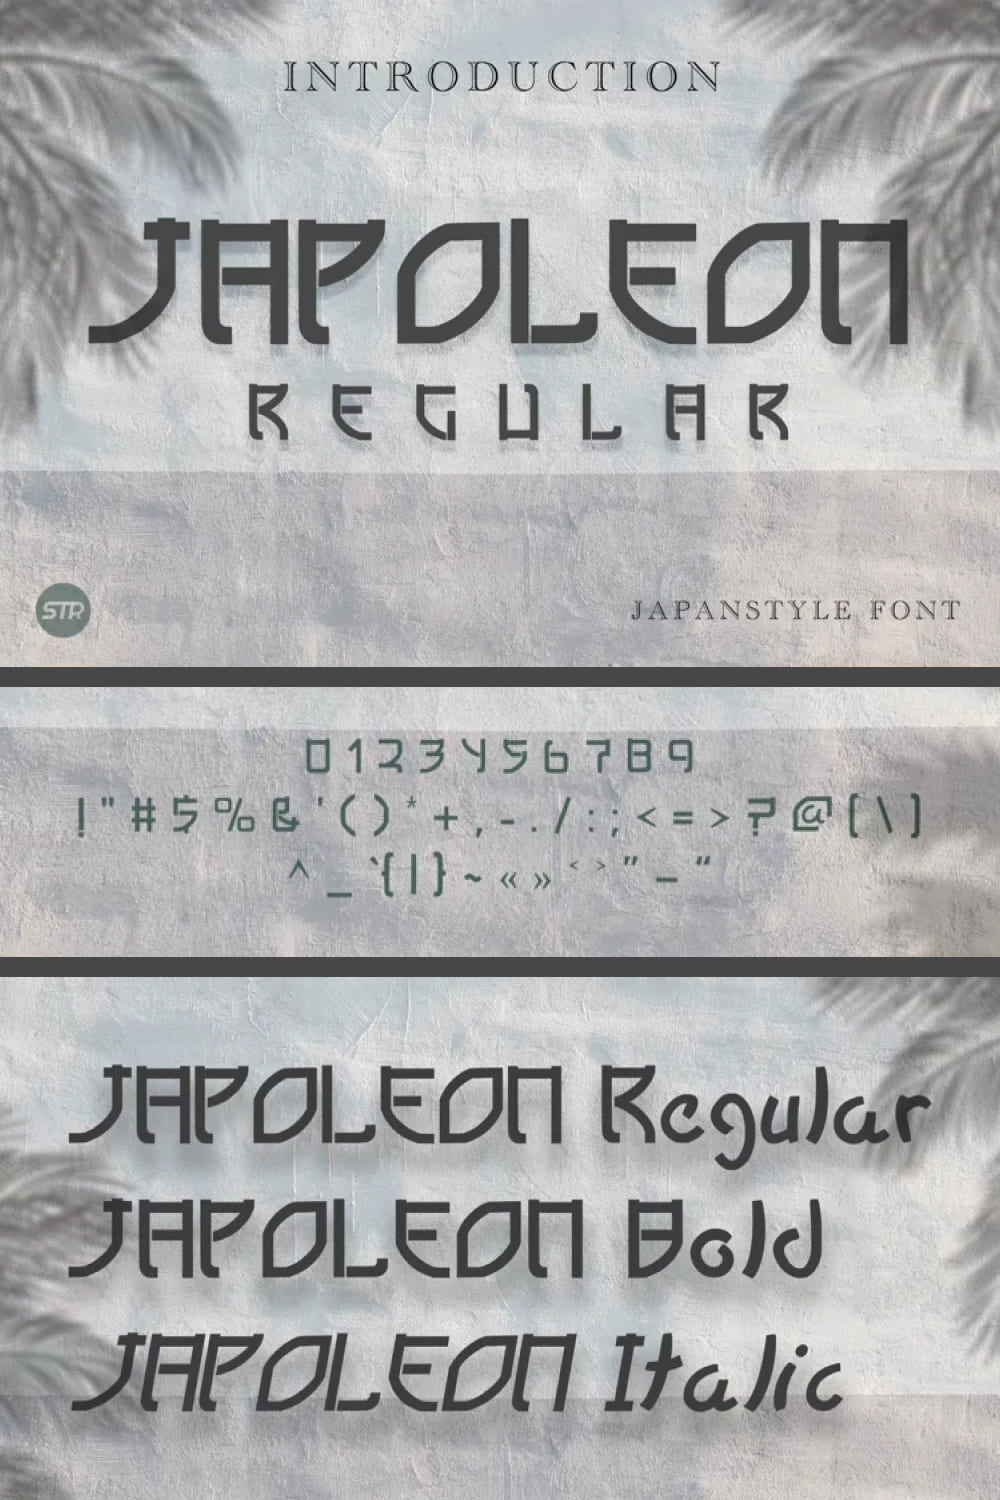 An example of a Japoleon Regular font in black on a gray background.